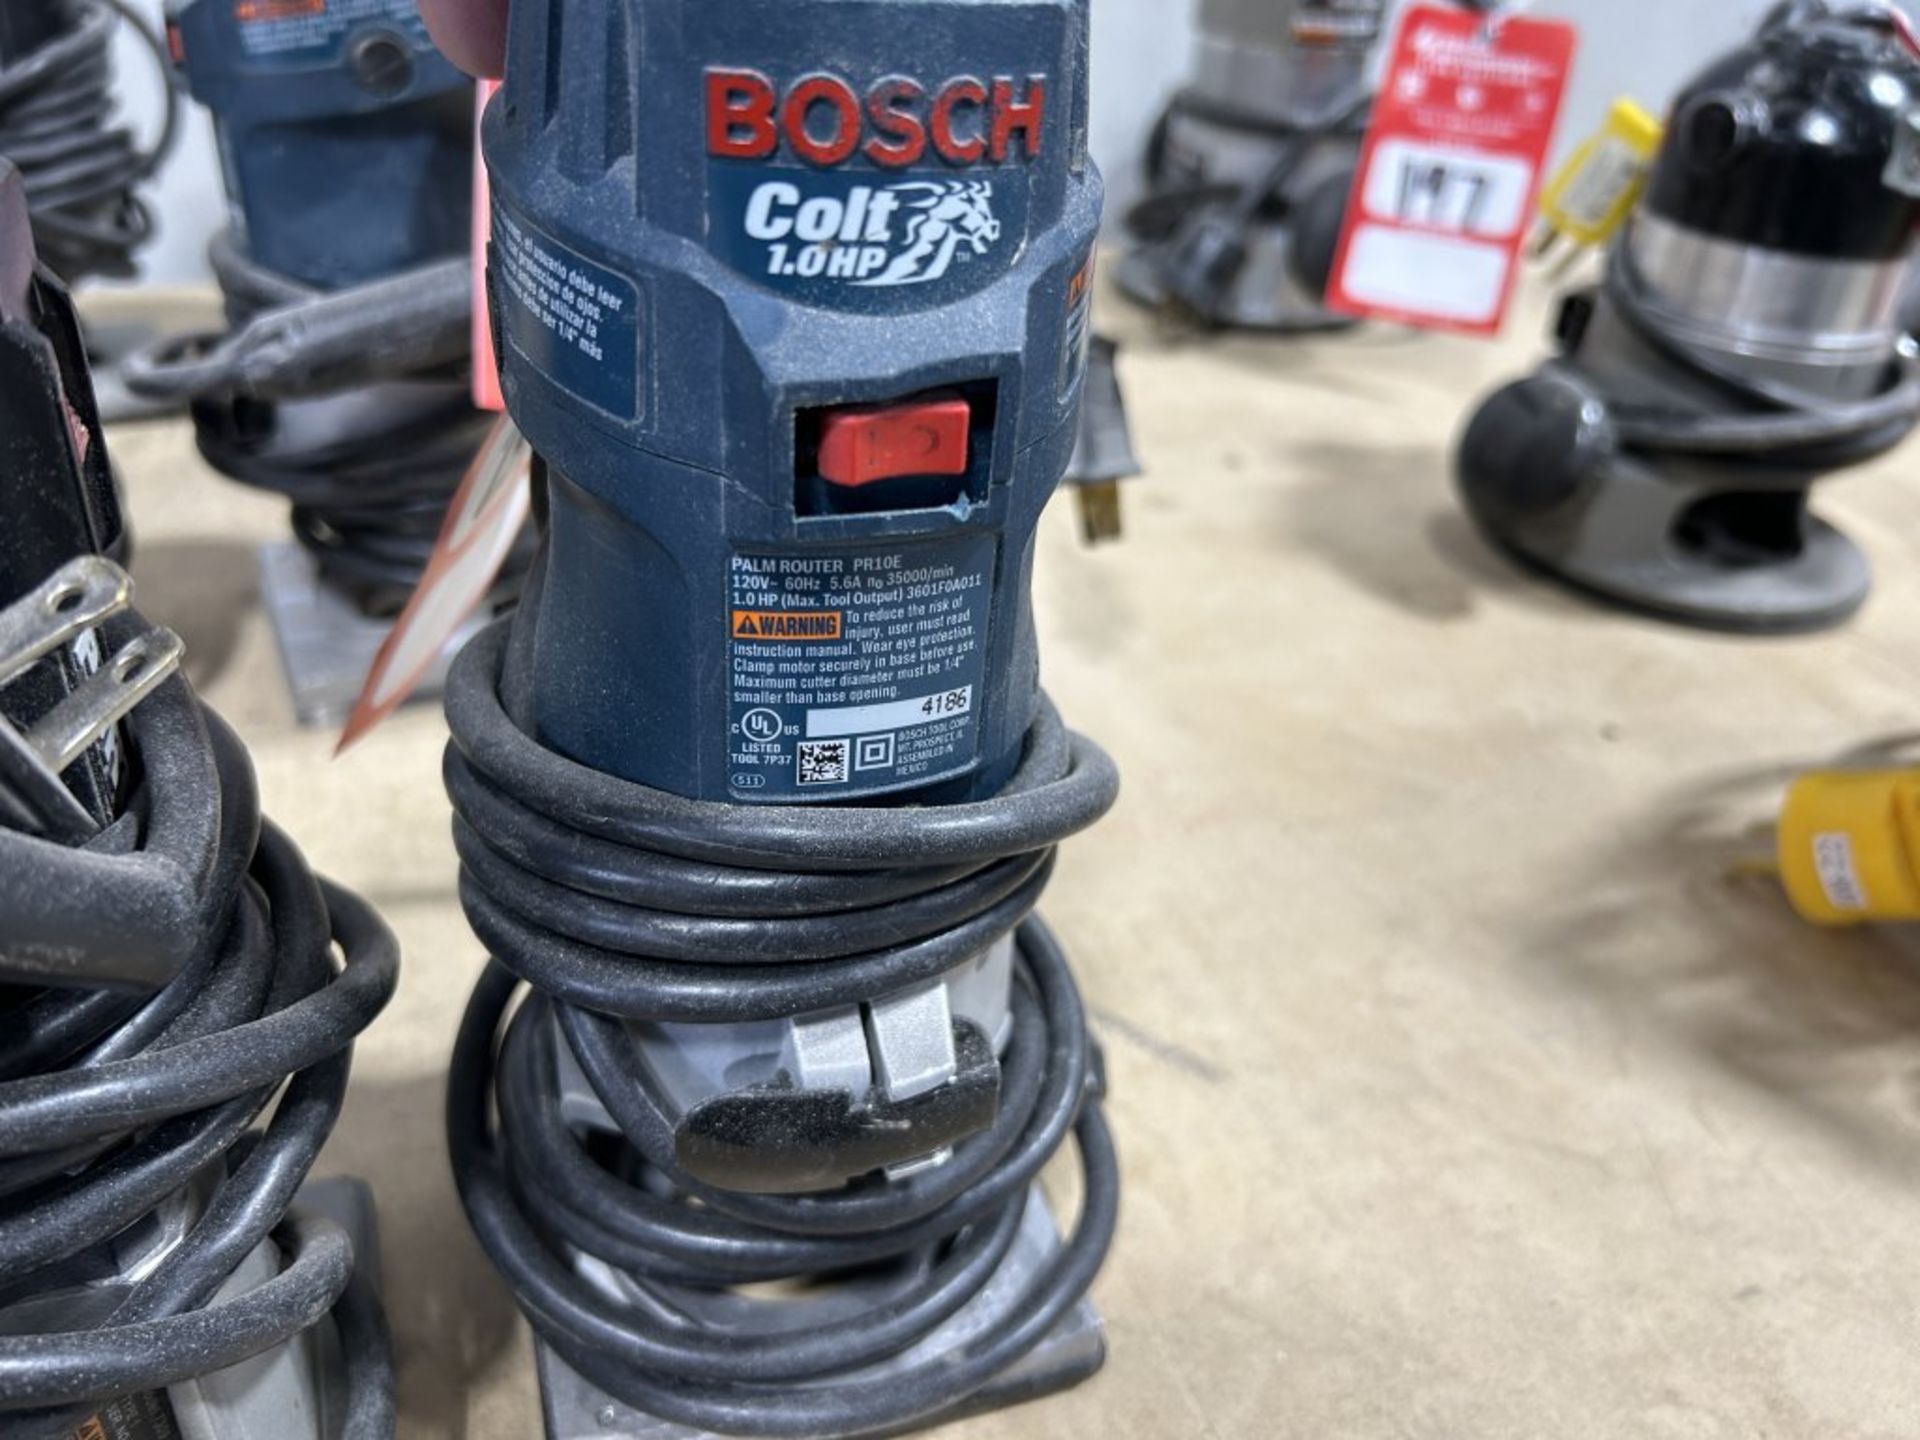 BOSCH COLT 1.0HP ROUTER, AND PORTER-CABLE 7301 ROUTER - Image 3 of 3